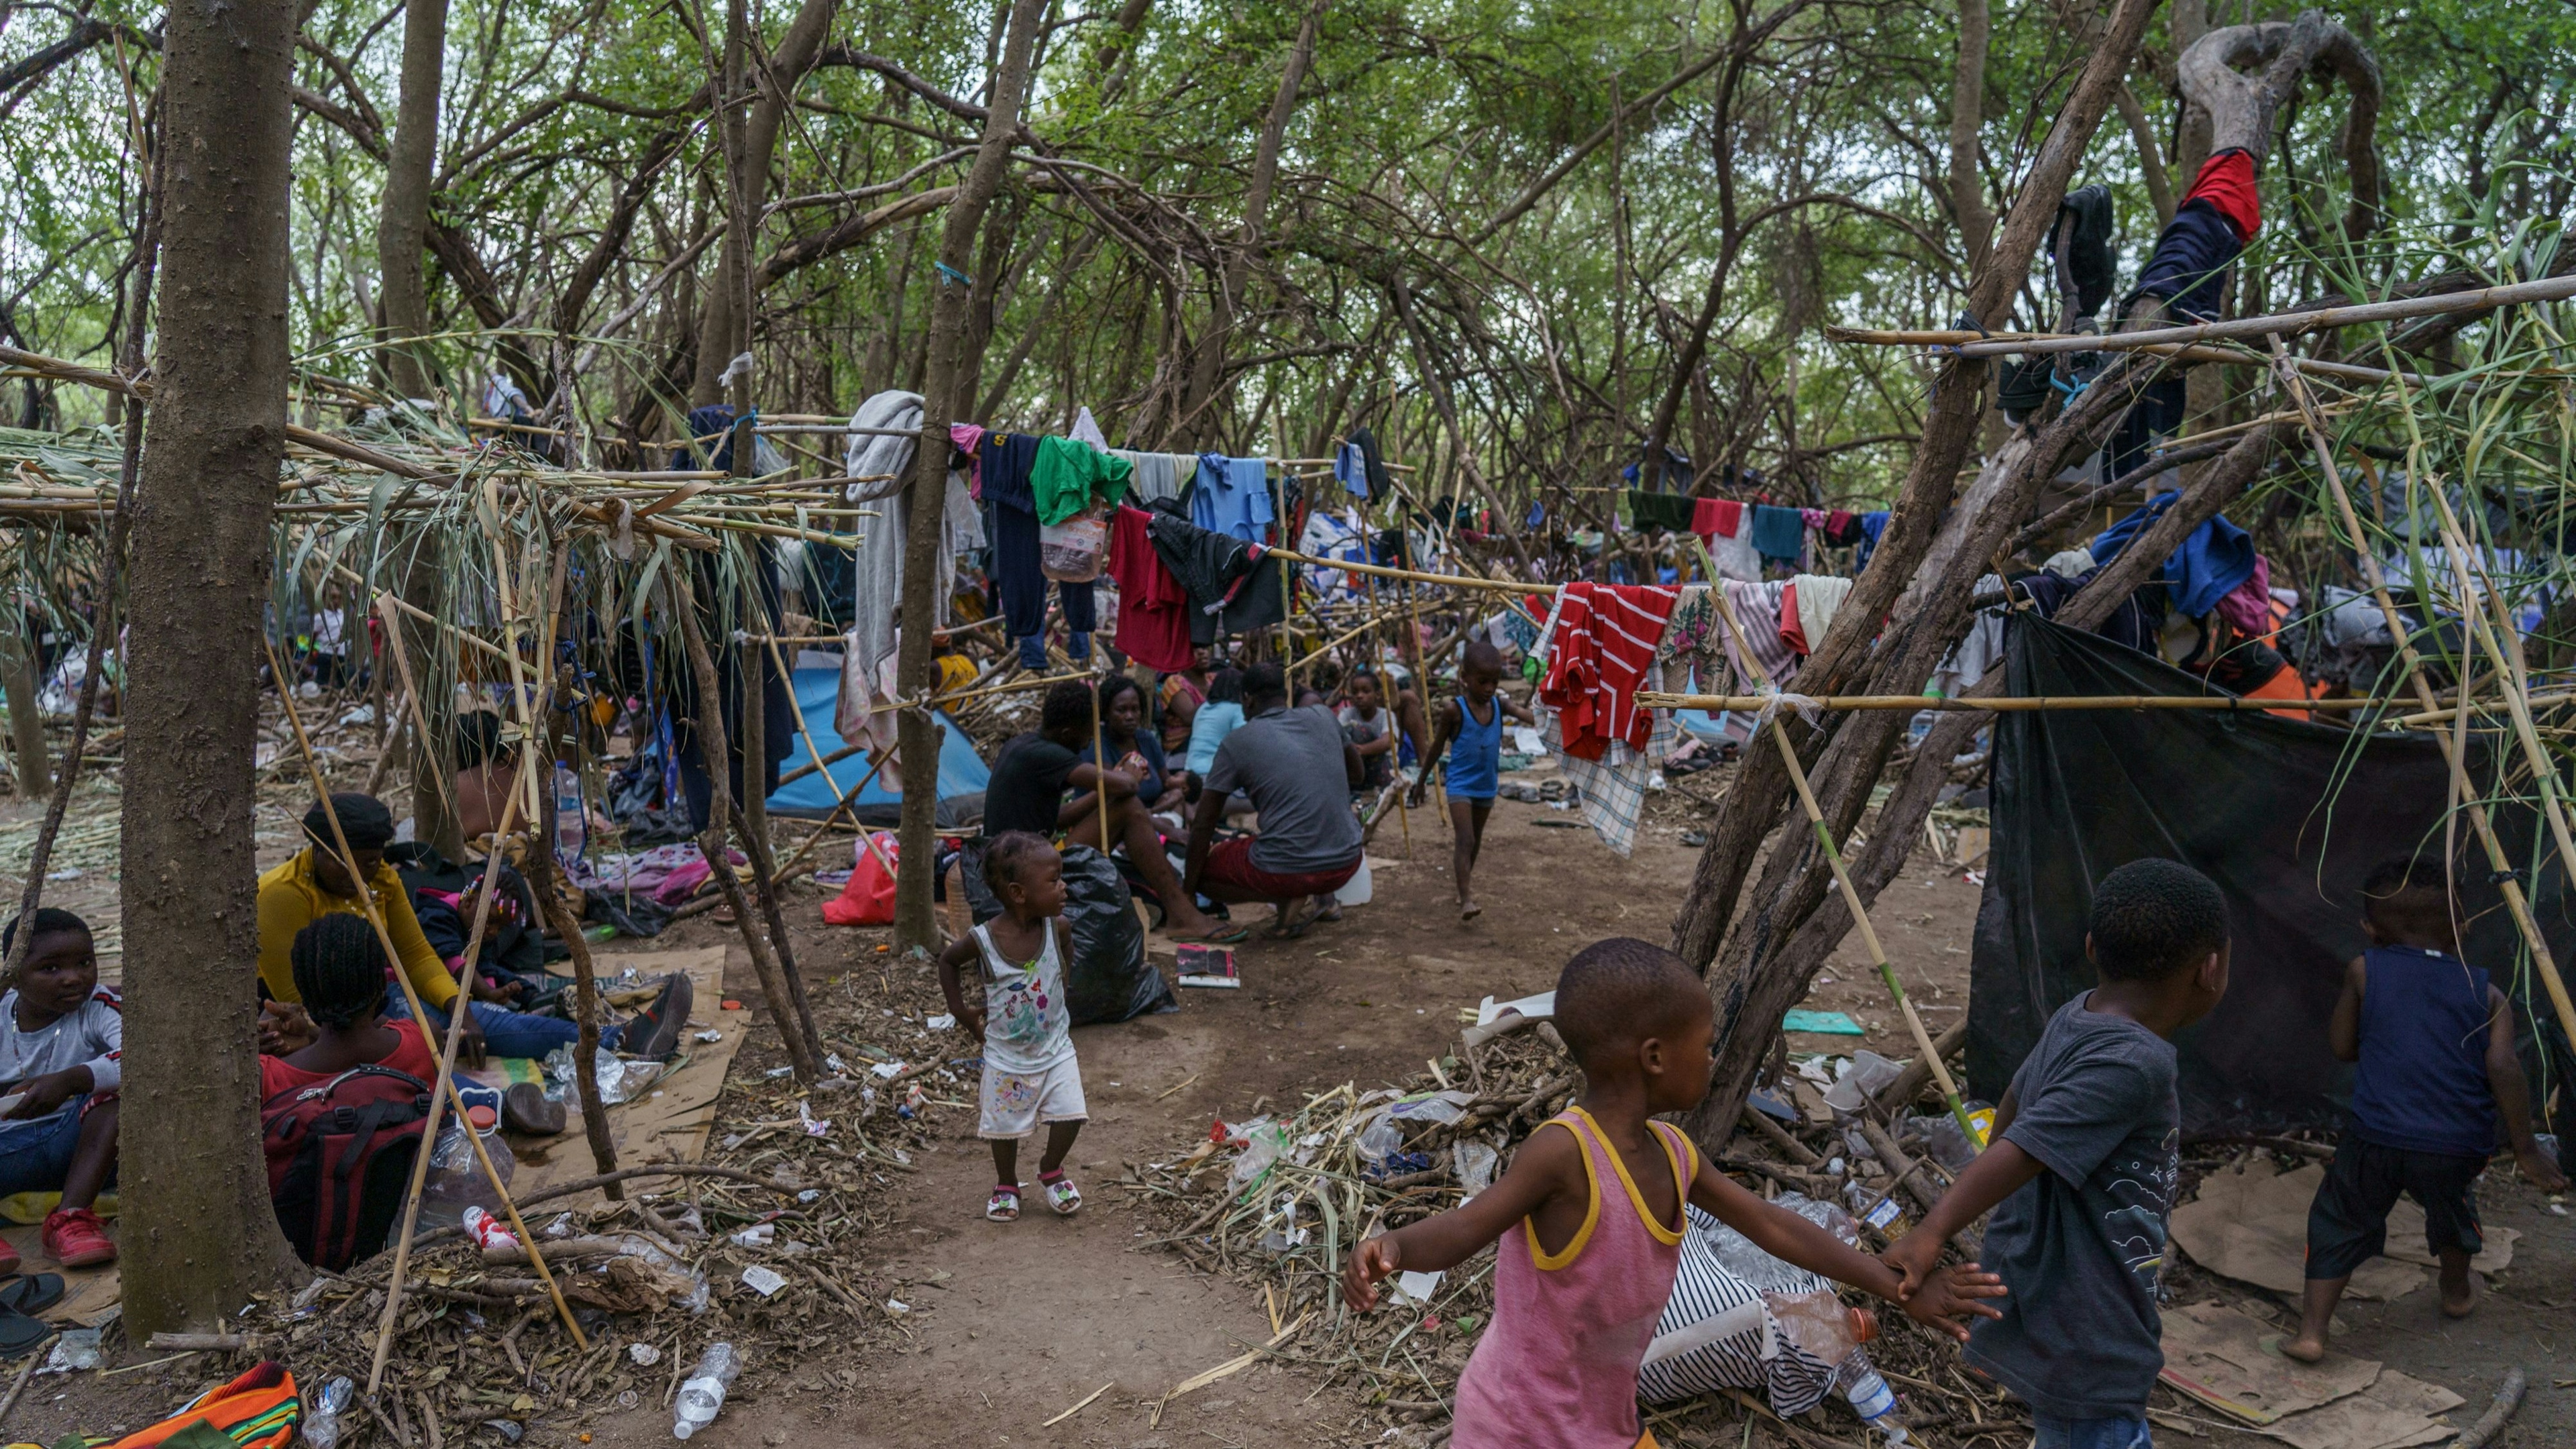 Haitian migrants are pictured in a makeshift encampment where more than 12,000 people hoping to enter the United States await under the international bridge in Del Rio, Texas